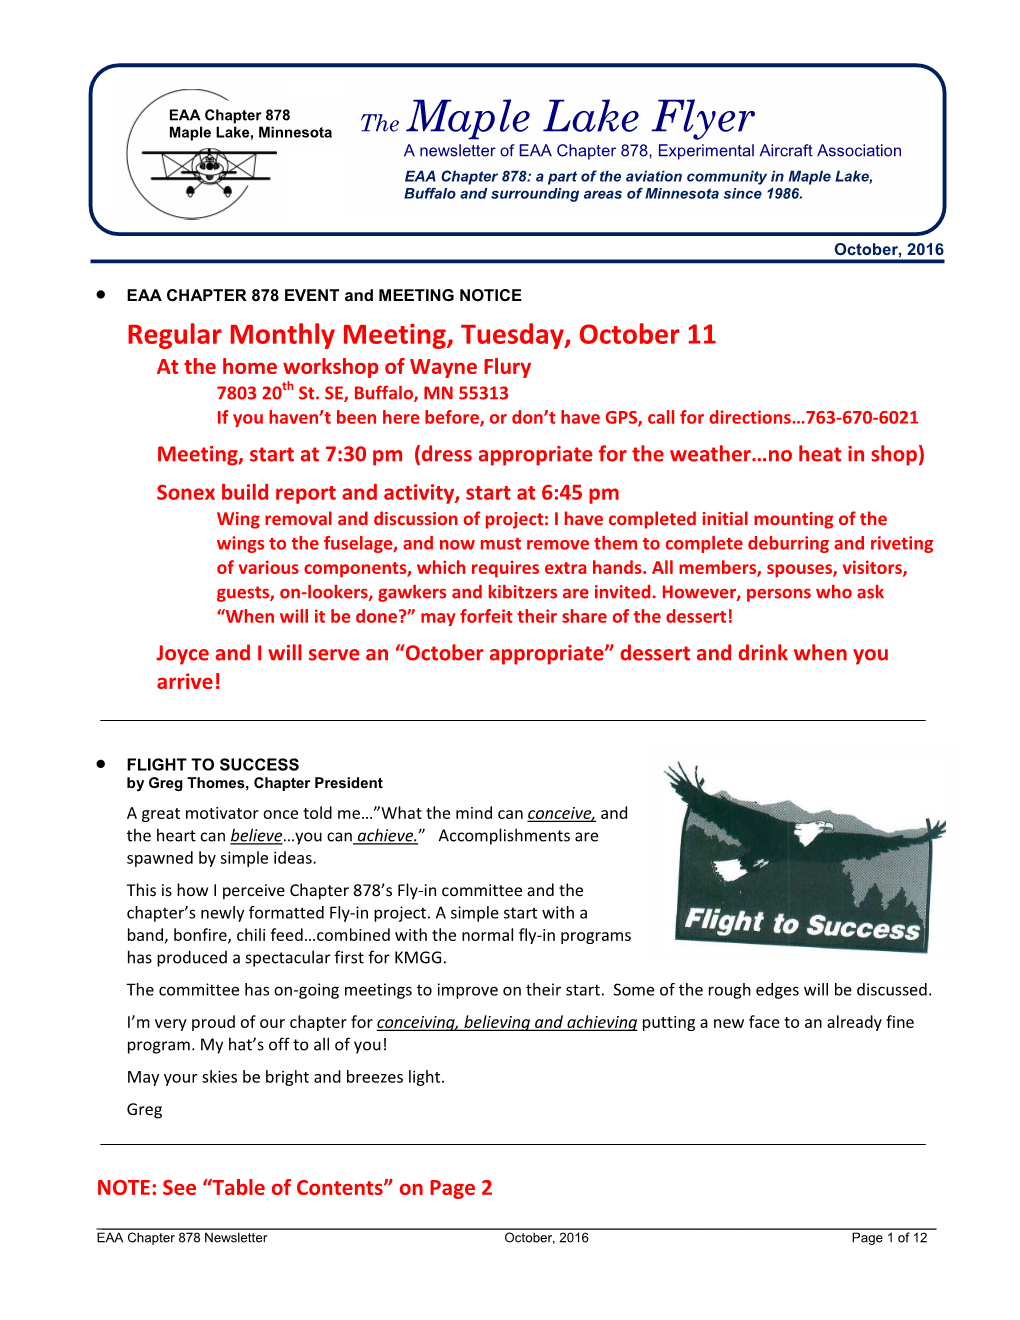 The Maple Lake Flyer a Newsletter of EAA Chapter 878, Experimental Aircraft Association